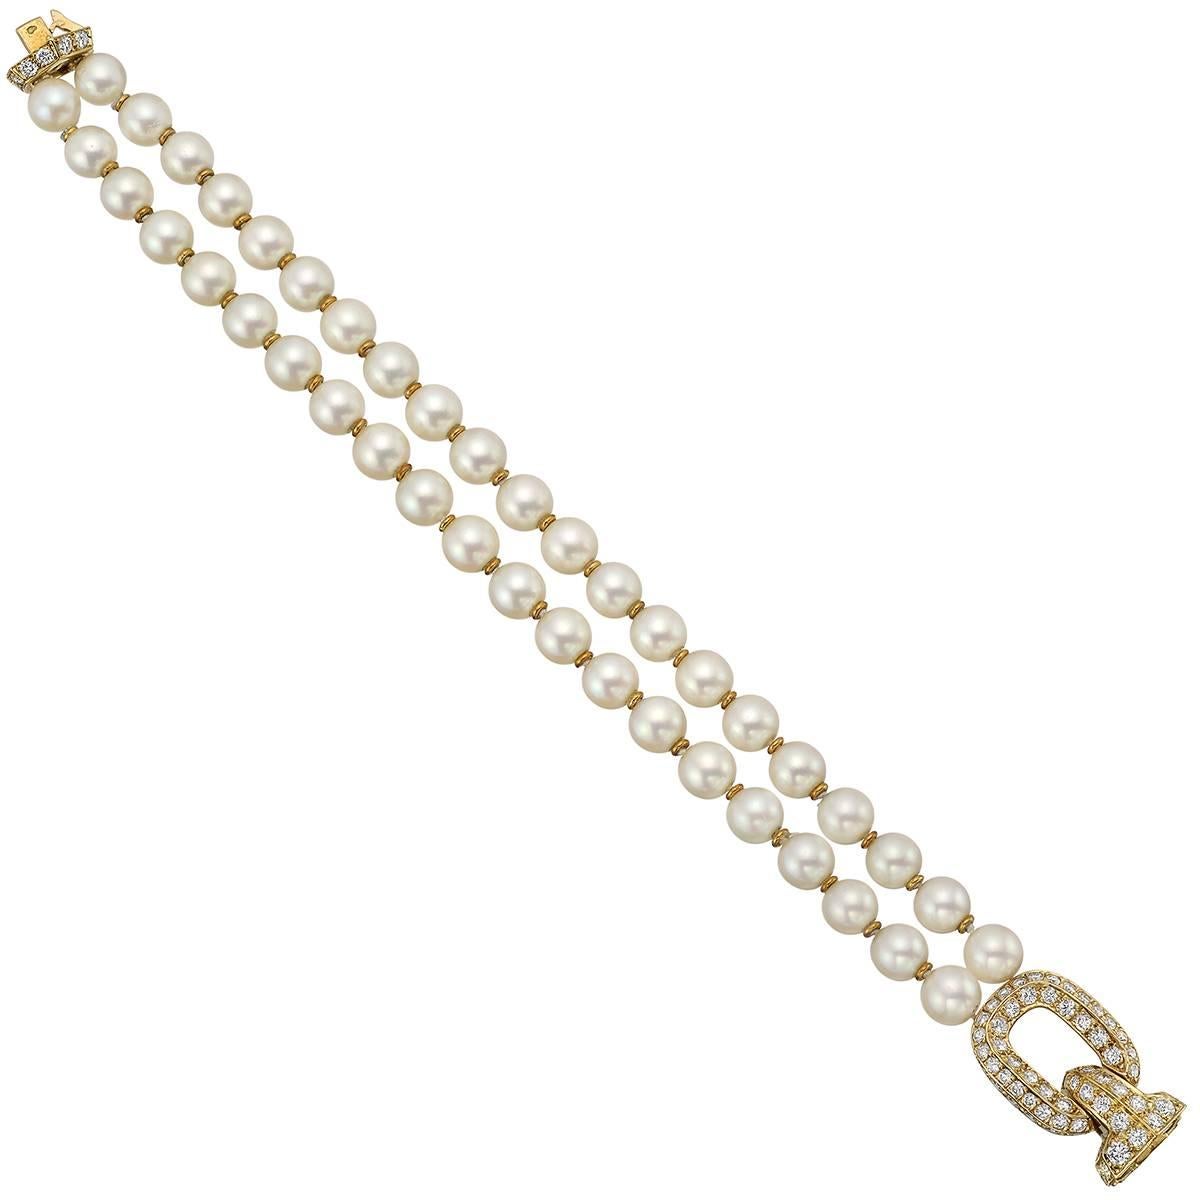 Cartier Two-Strand Pearl Bracelet with Diamond Buckle Clasp